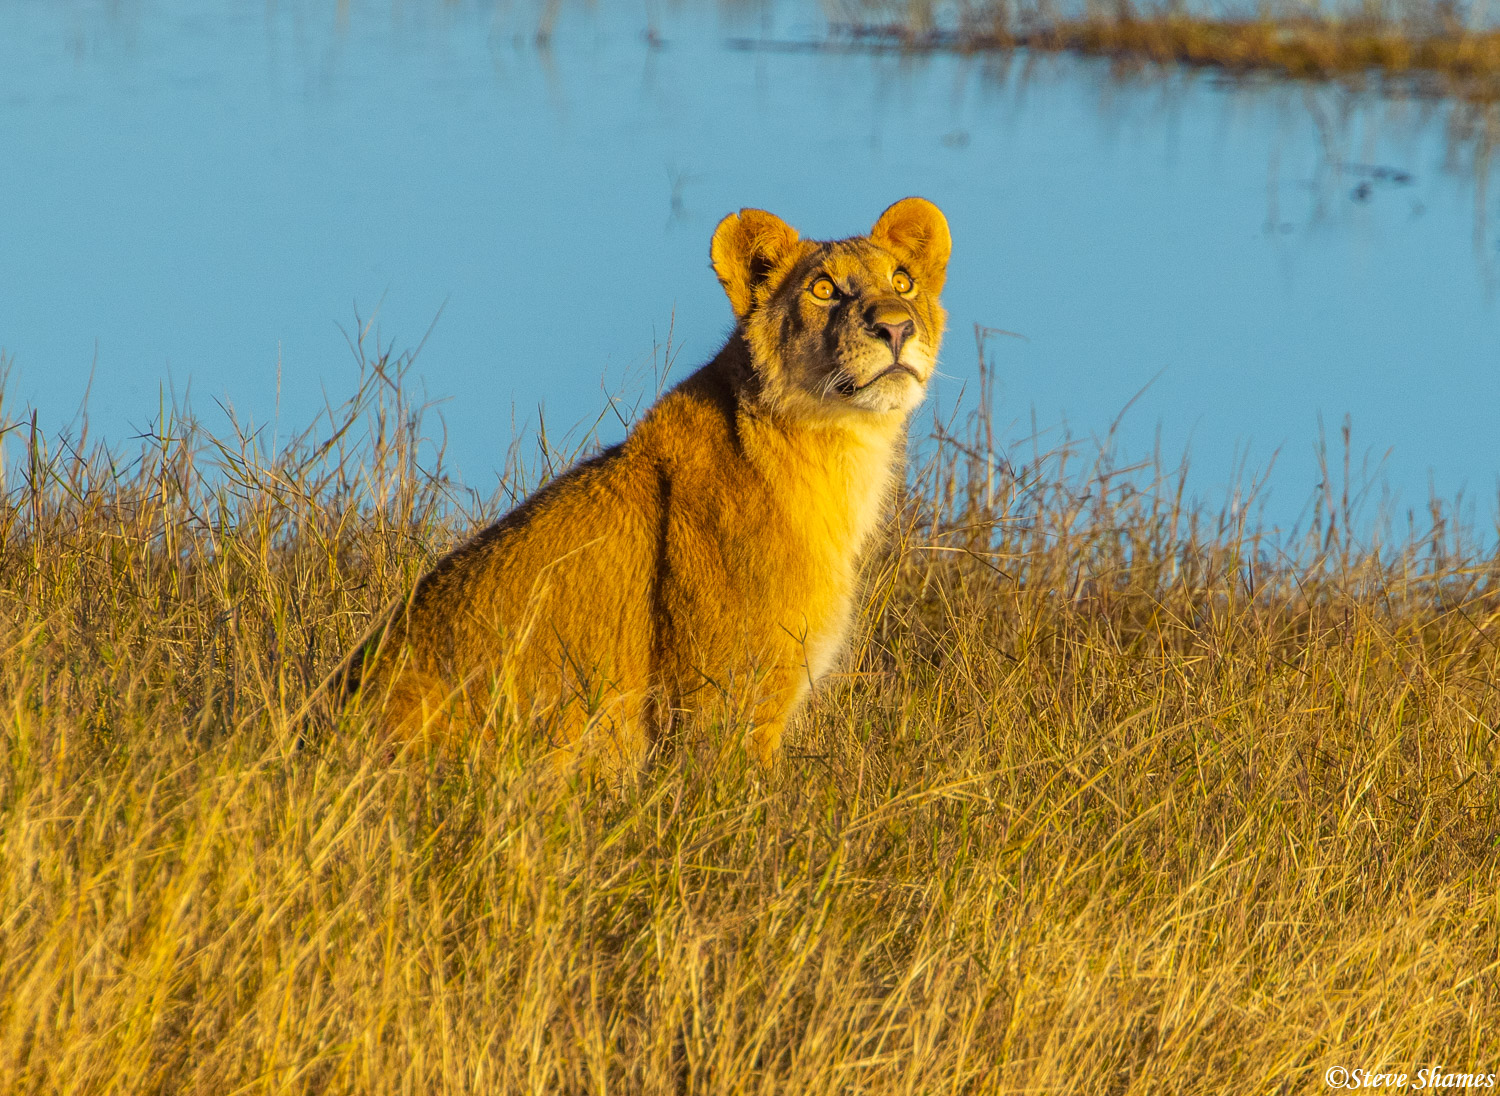 Lioness in the marshy grass of the Chobe River checking out a bird flying by.